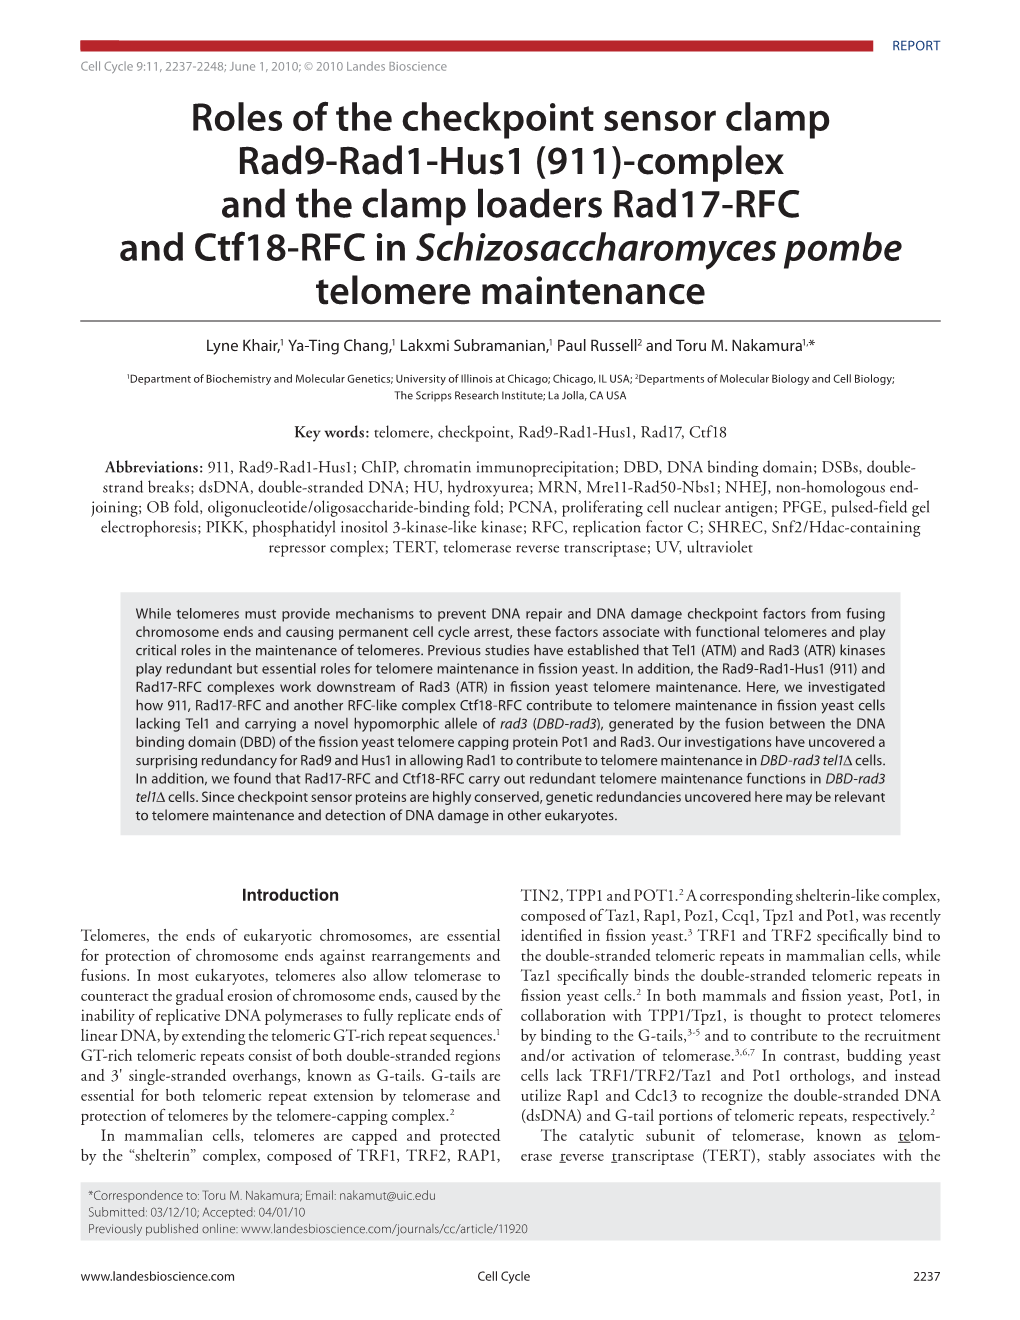 Roles of the Checkpoint Sensor Clamp Rad9-Rad1-Hus1 (911)-Complex and the Clamp Loaders Rad17-RFC and Ctf18-RFC in Schizosaccharomyces Pombe Telomere Maintenance